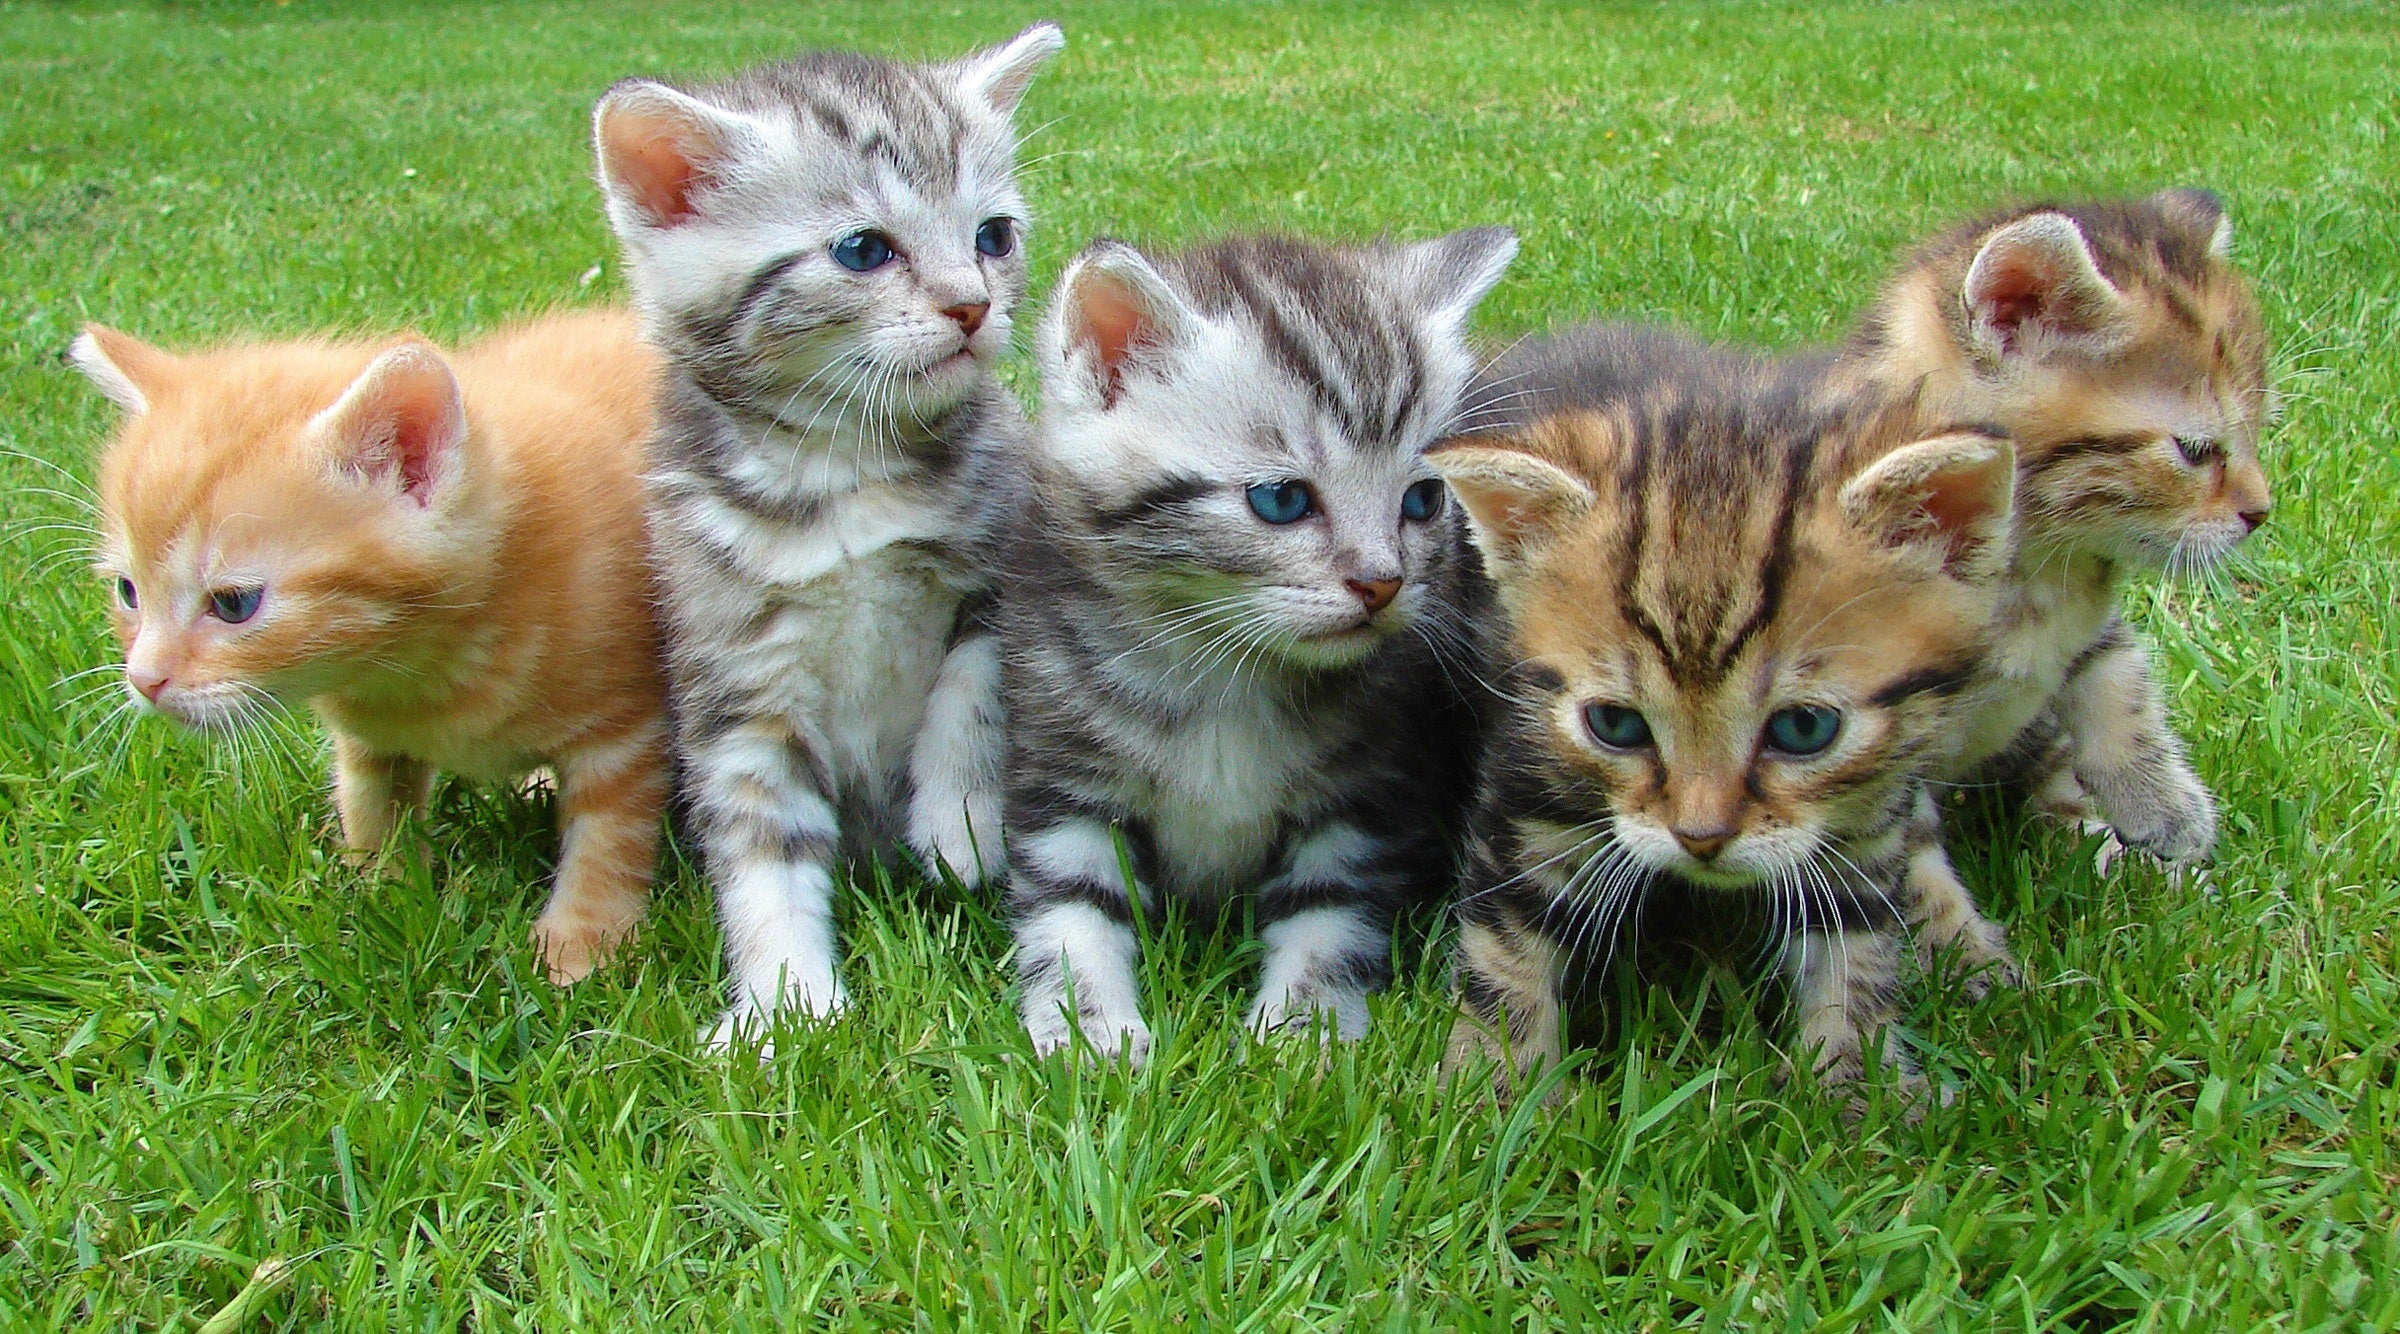 cats-are-walking-on-grass